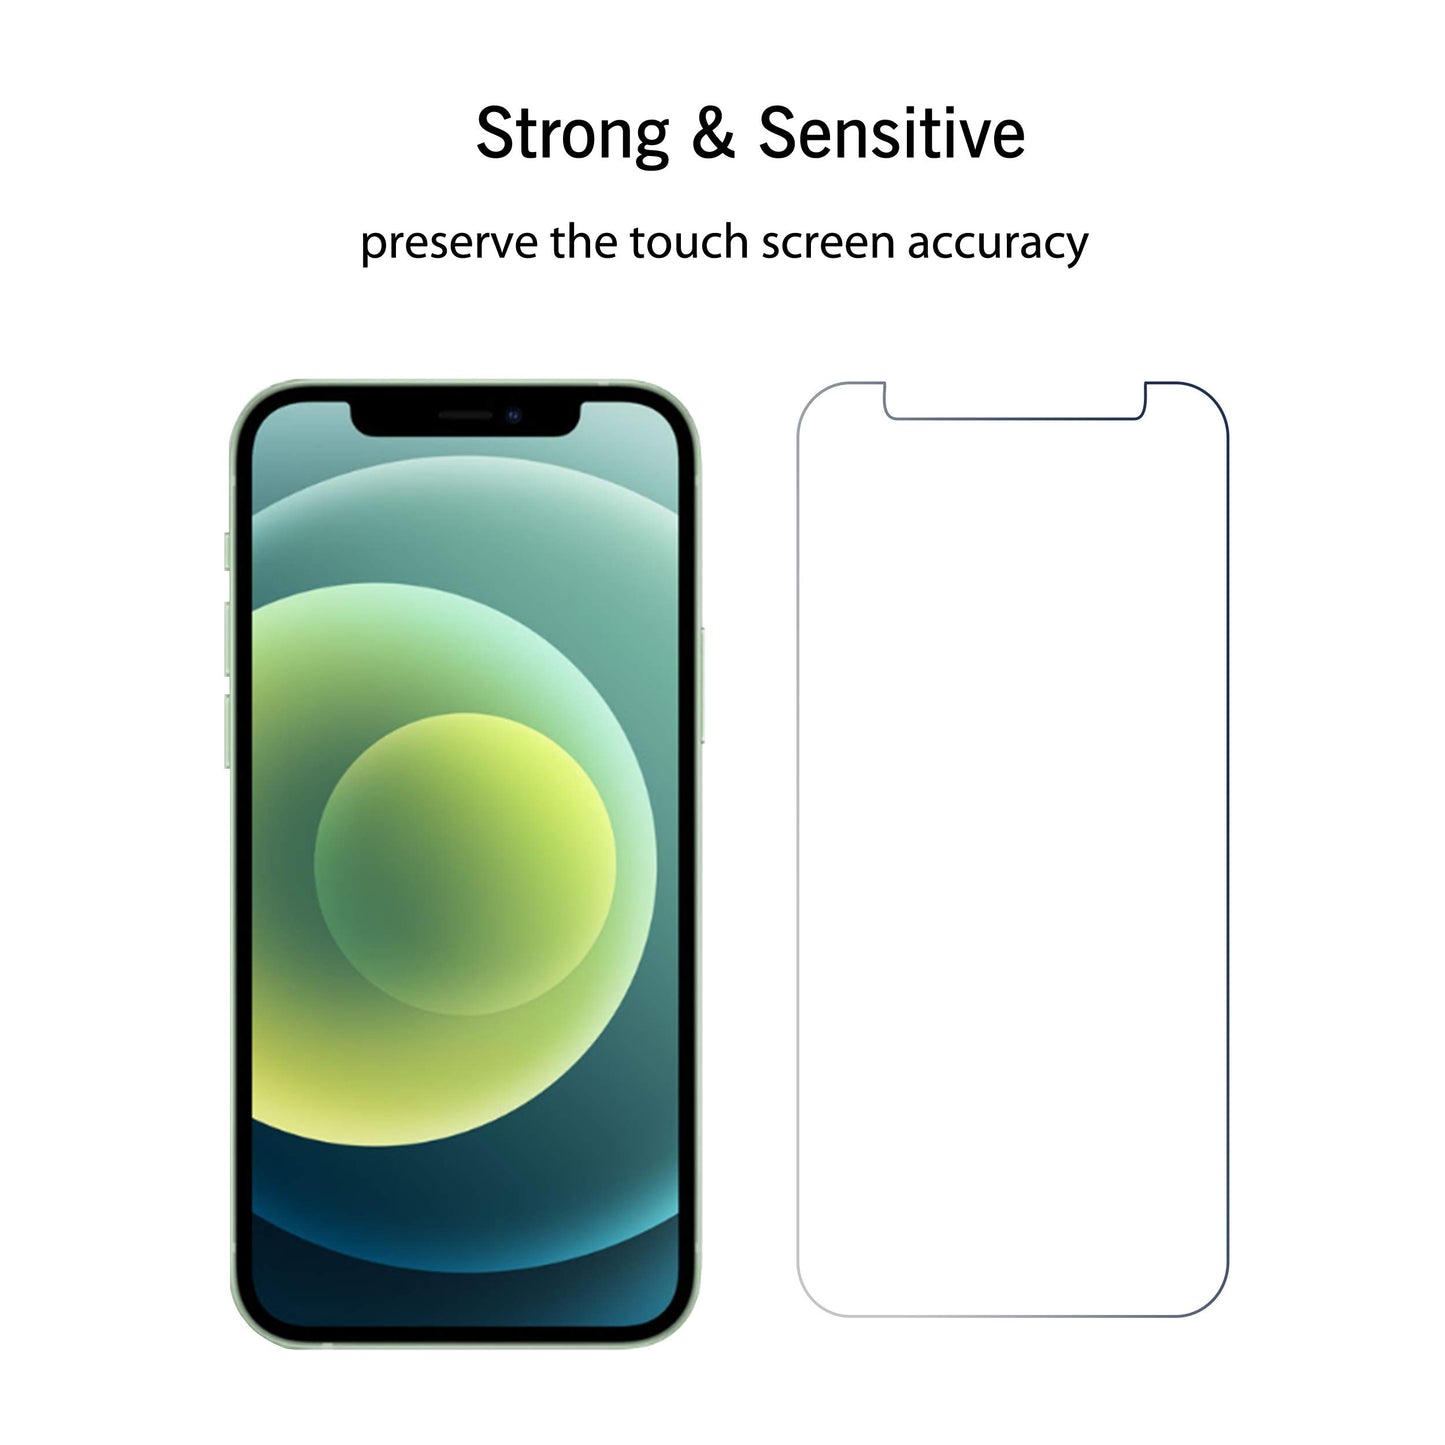 Ailun Glass Screen Protector Compatible for iPhone 11 / iPhone XR [6.1 Inch], 3 Pack Tempered Glass